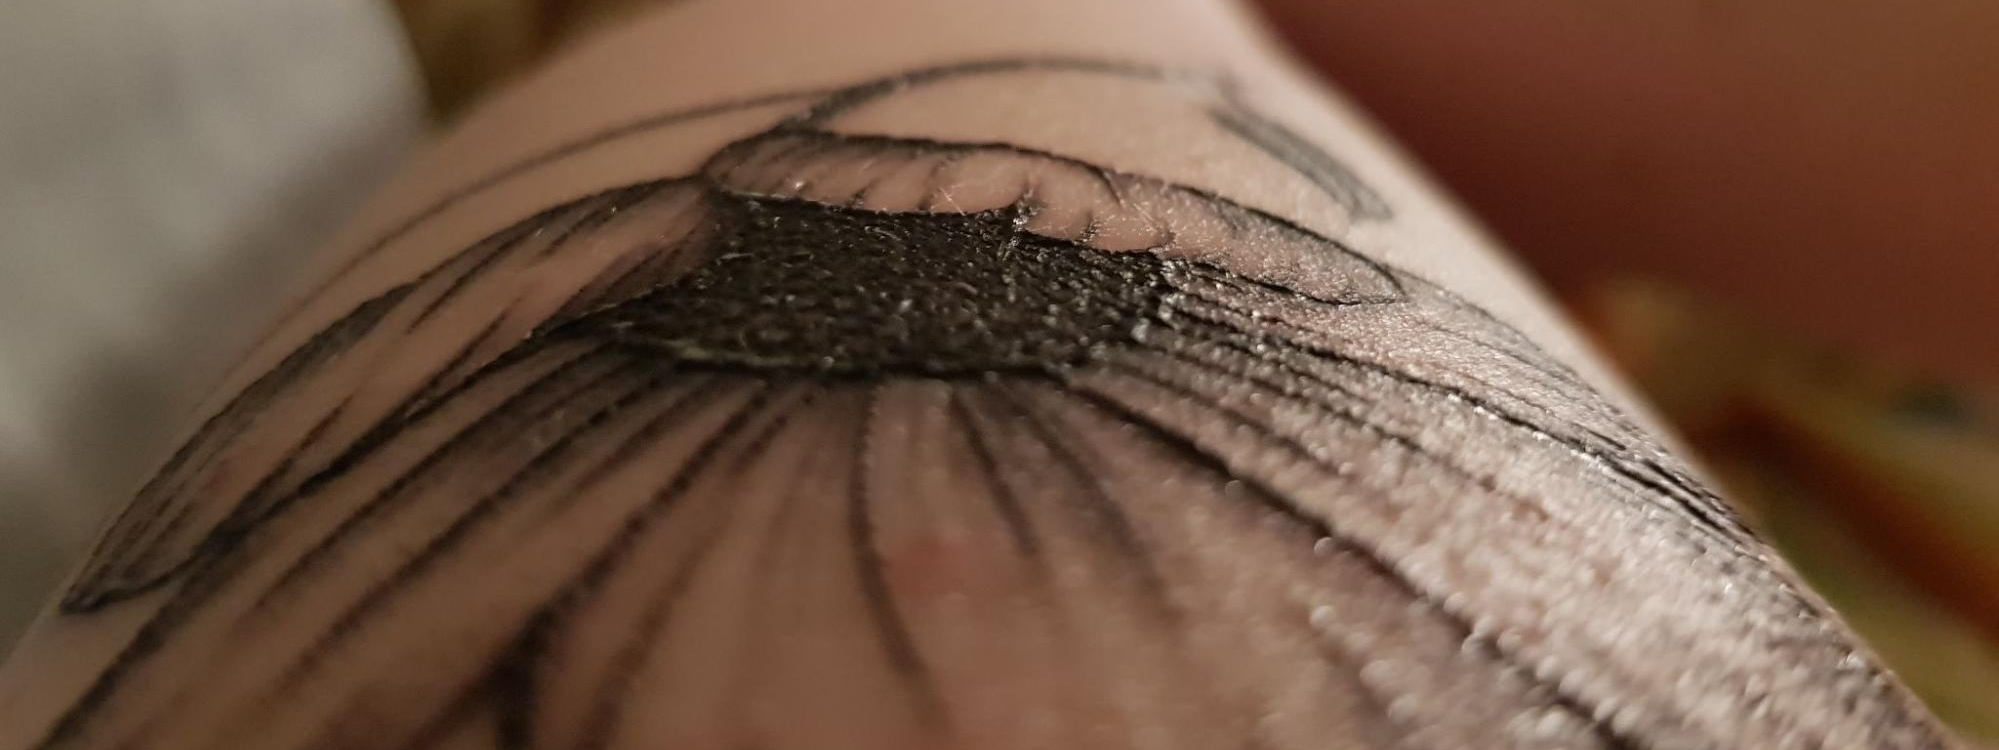 How To Fix A Raised Tattoo: 6 Possible Causes And Effective Treatment